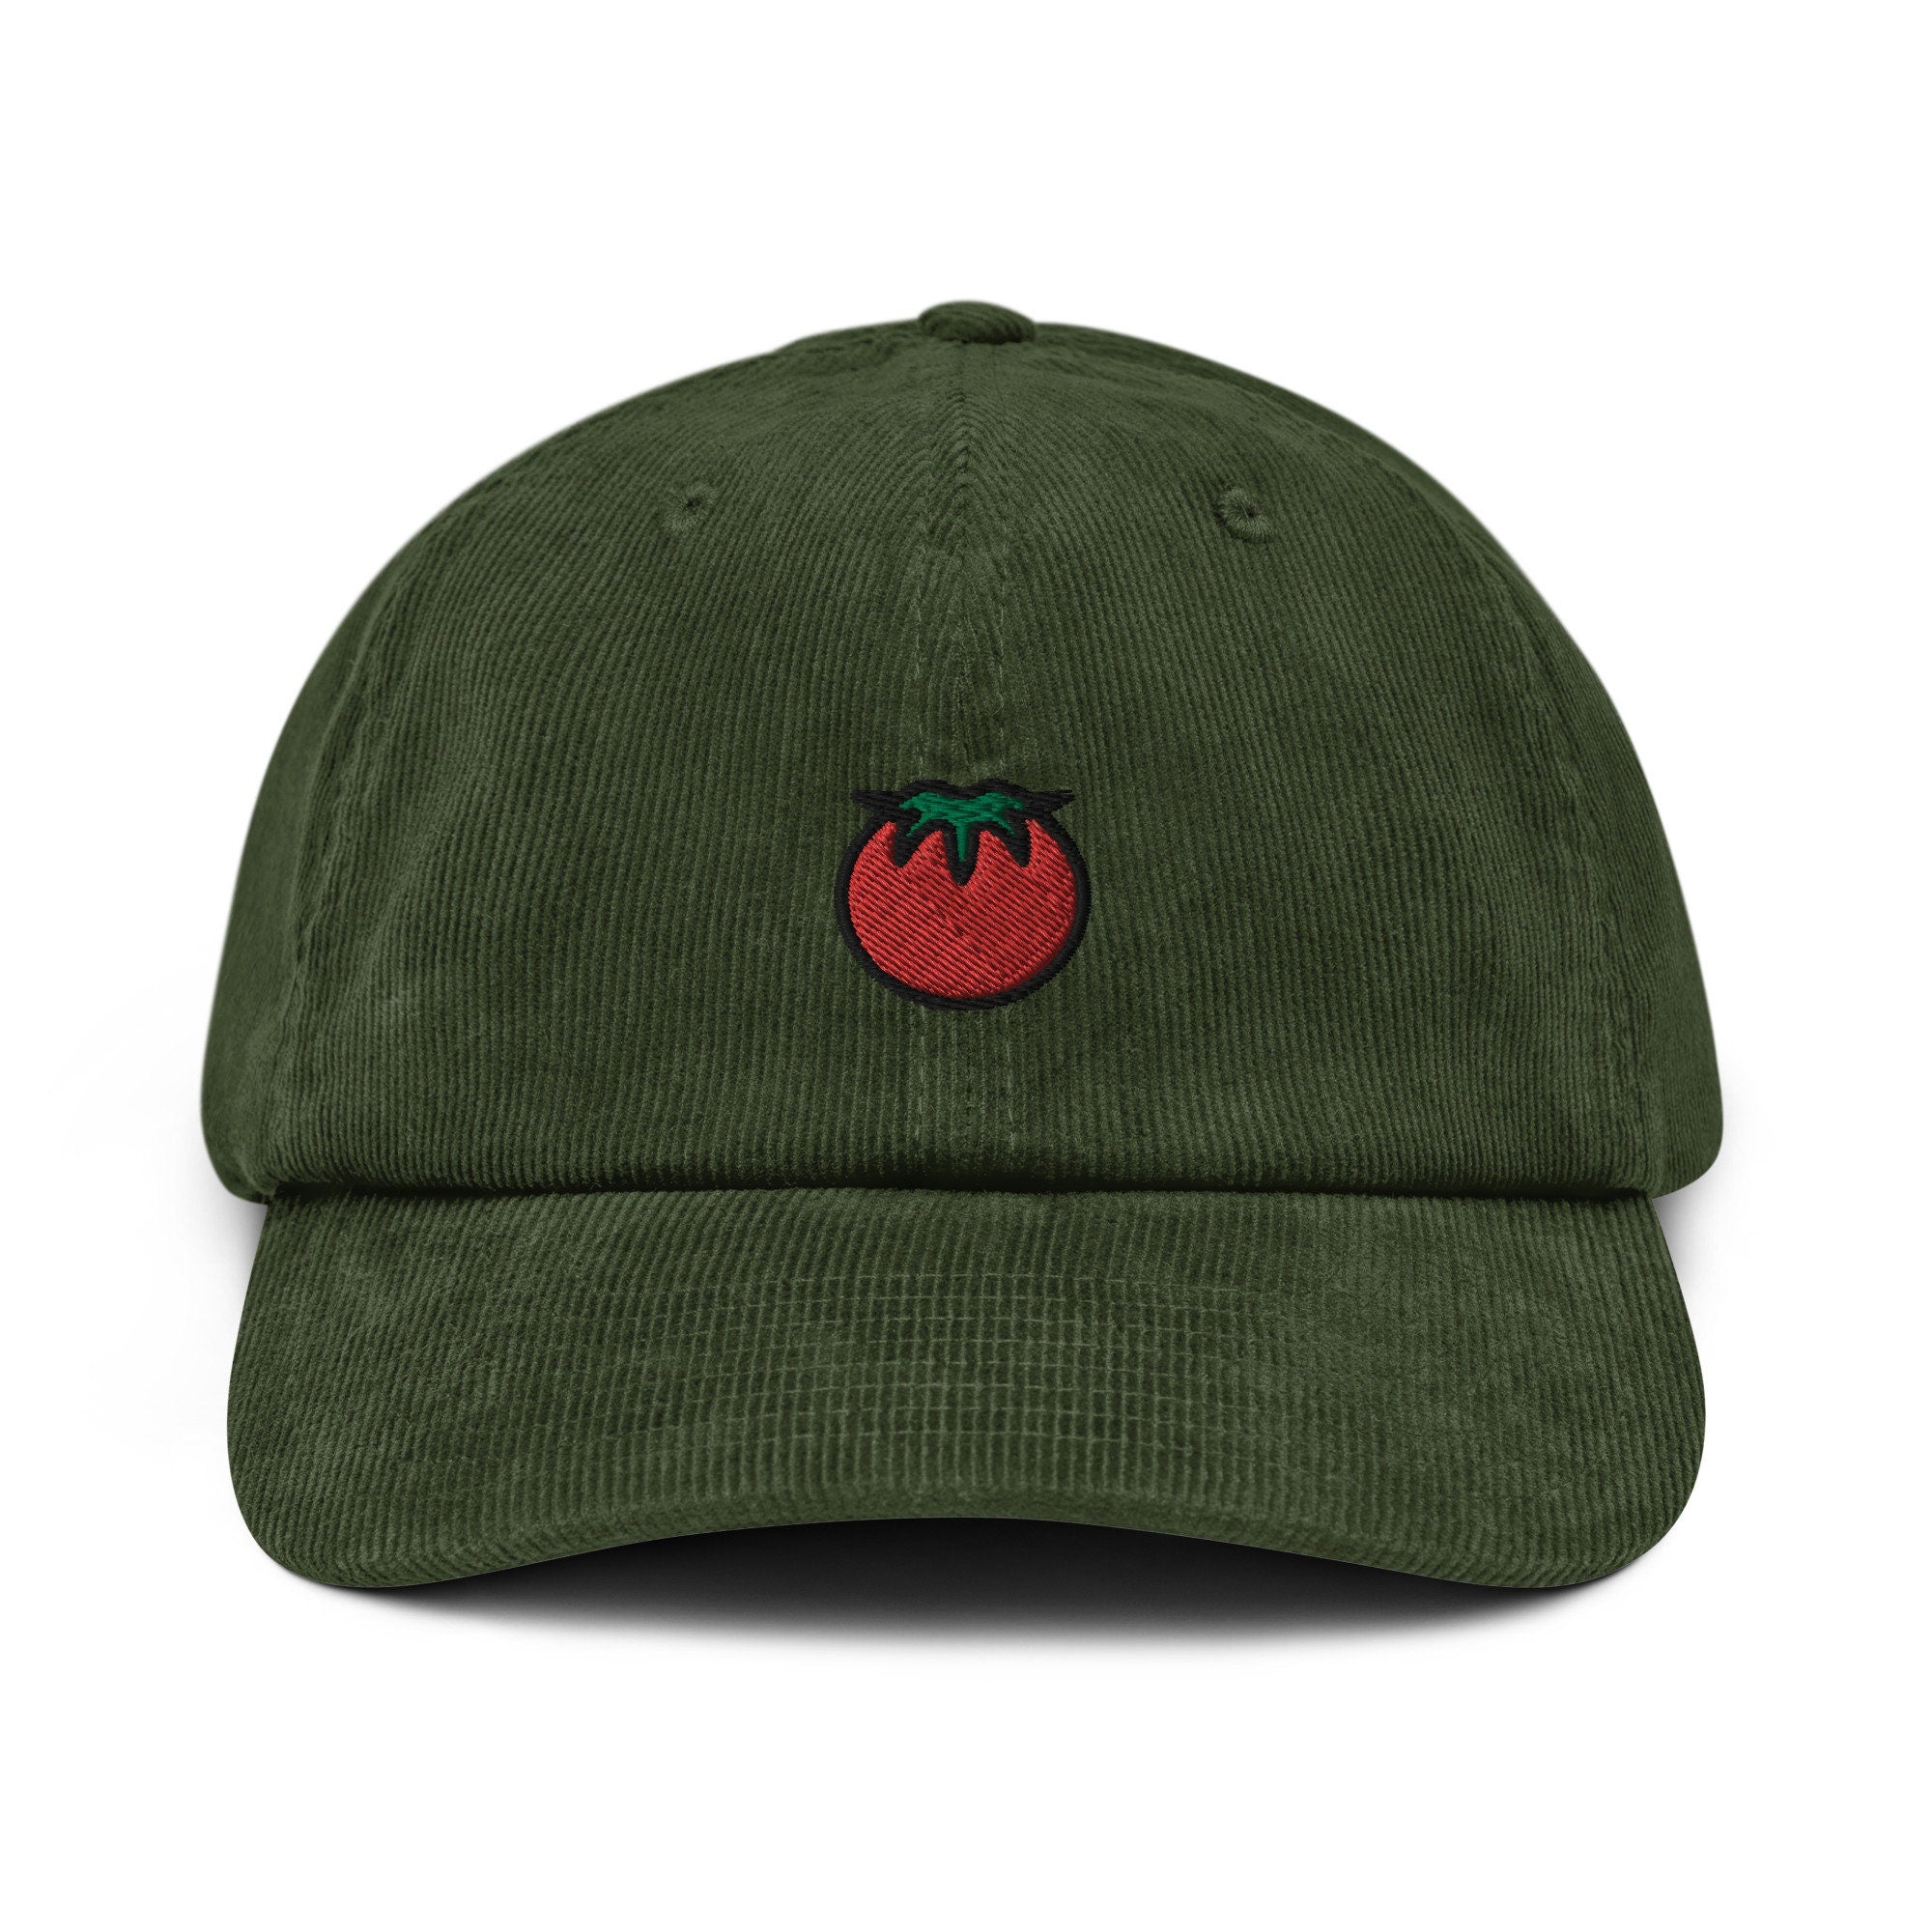 Tomato Corduroy Hat, Handmade Embroidered Corduroy Dad Cap - Multiple Colors